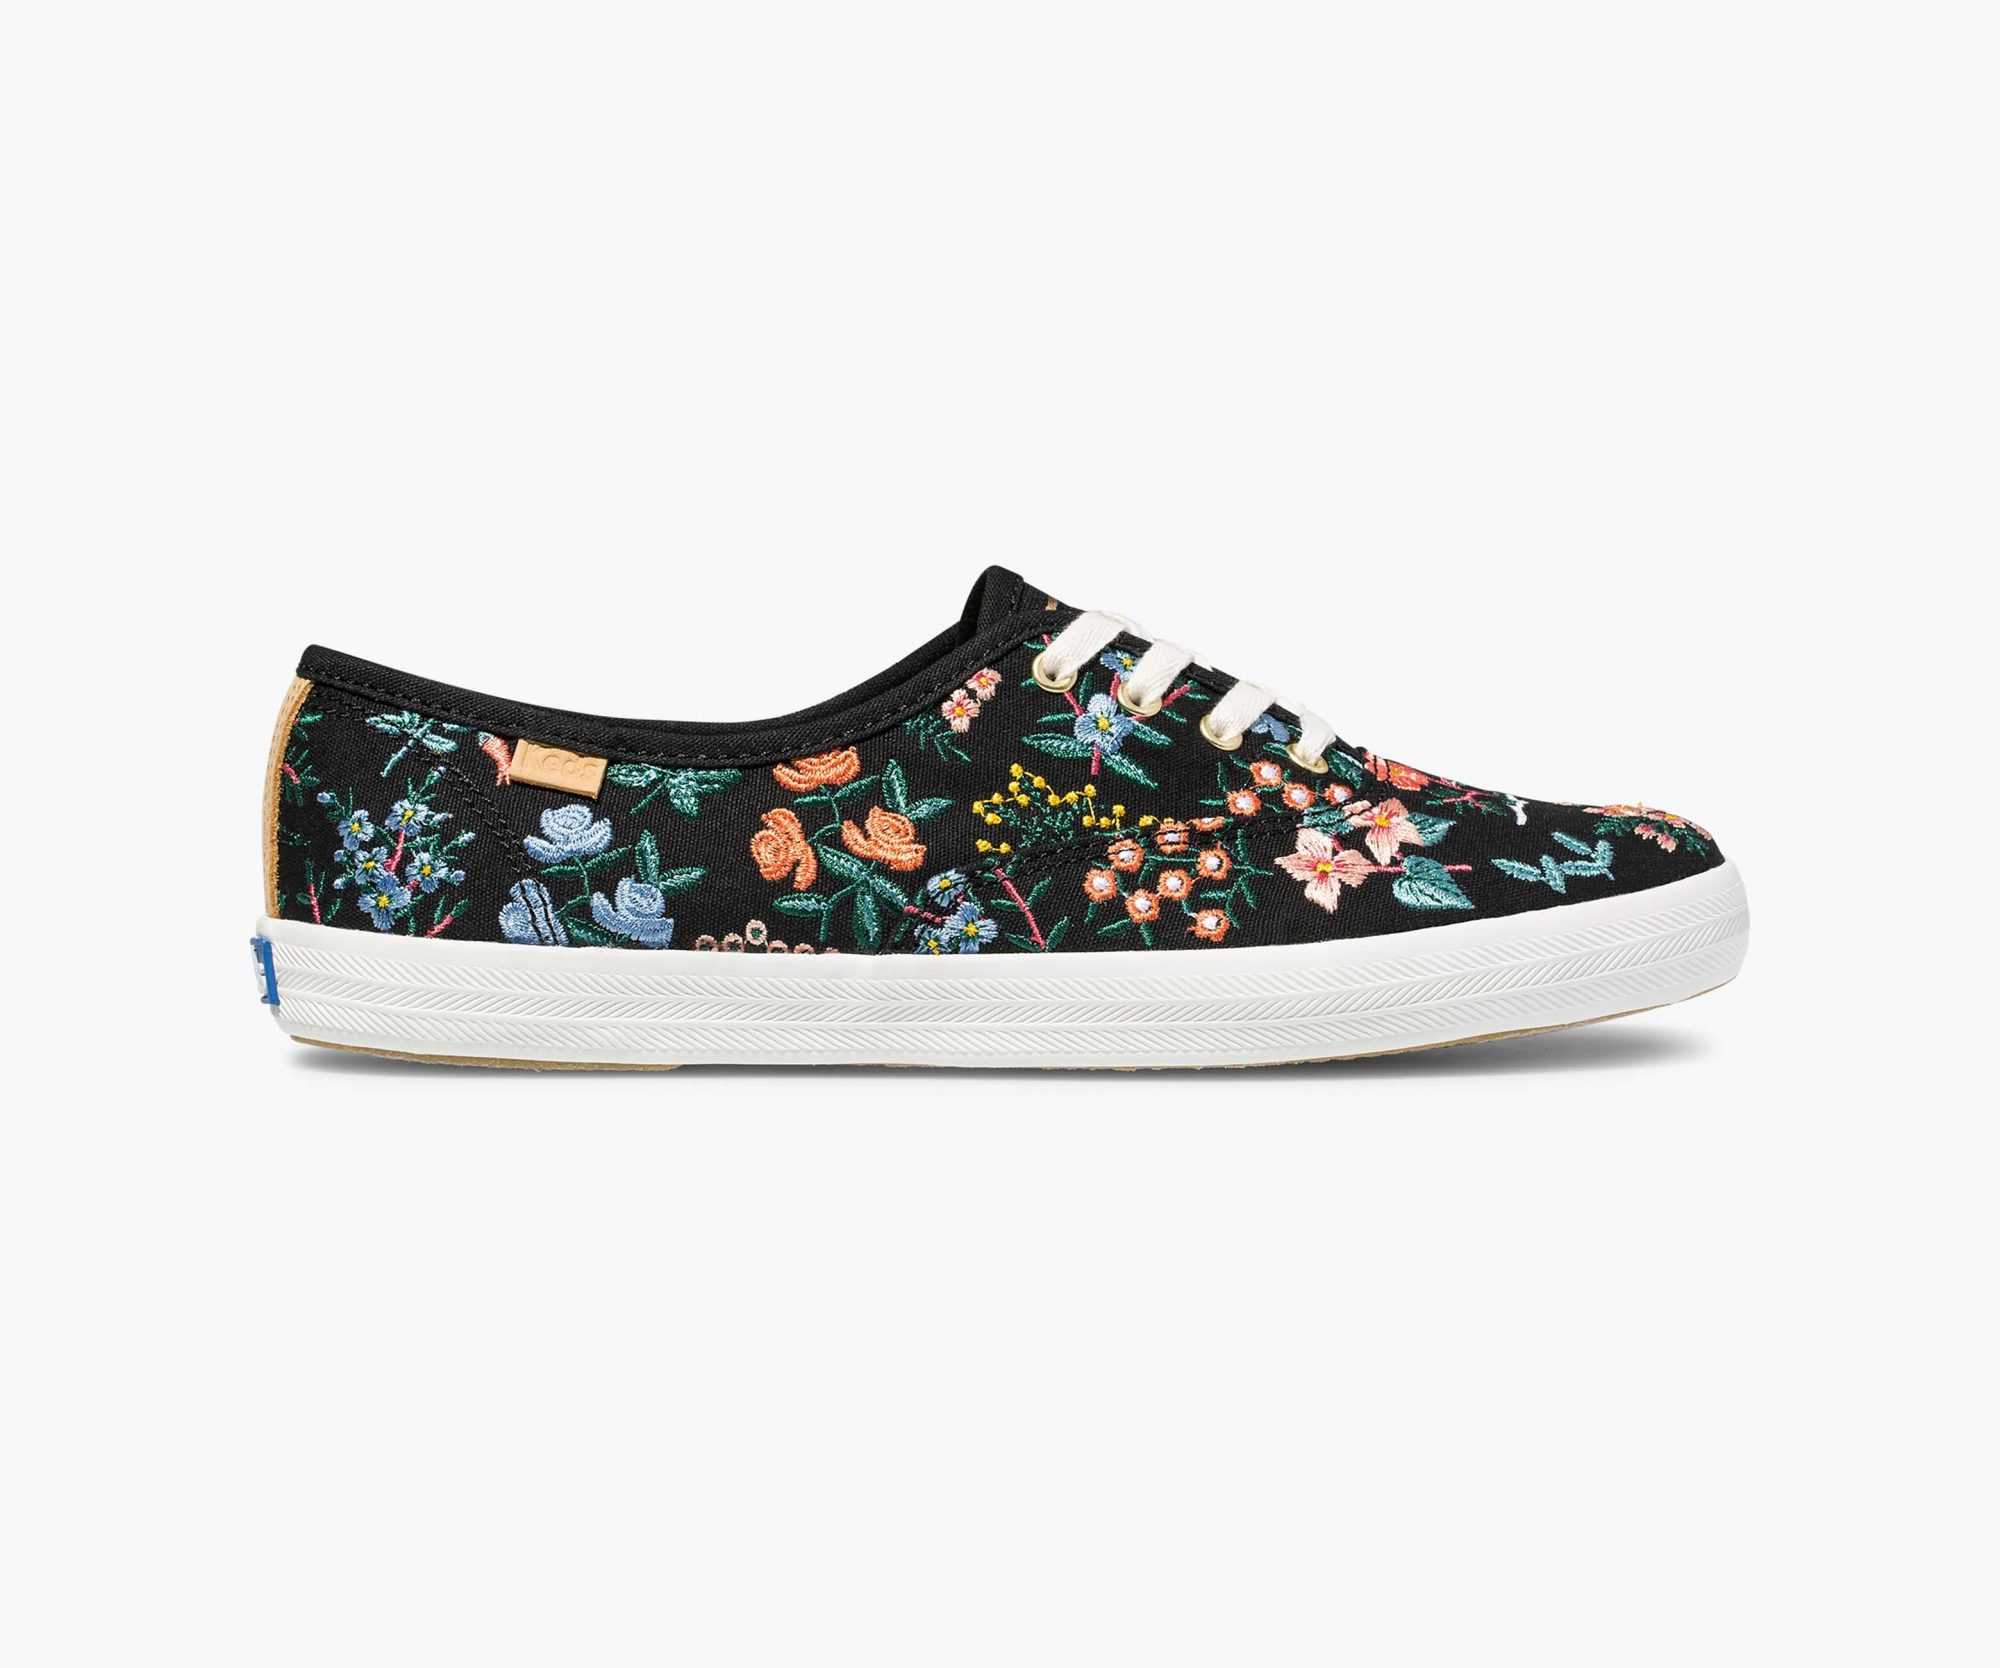 Rifle Paper Co. x Keds Fall 2020 collection wildflower embroidered champion sneaker